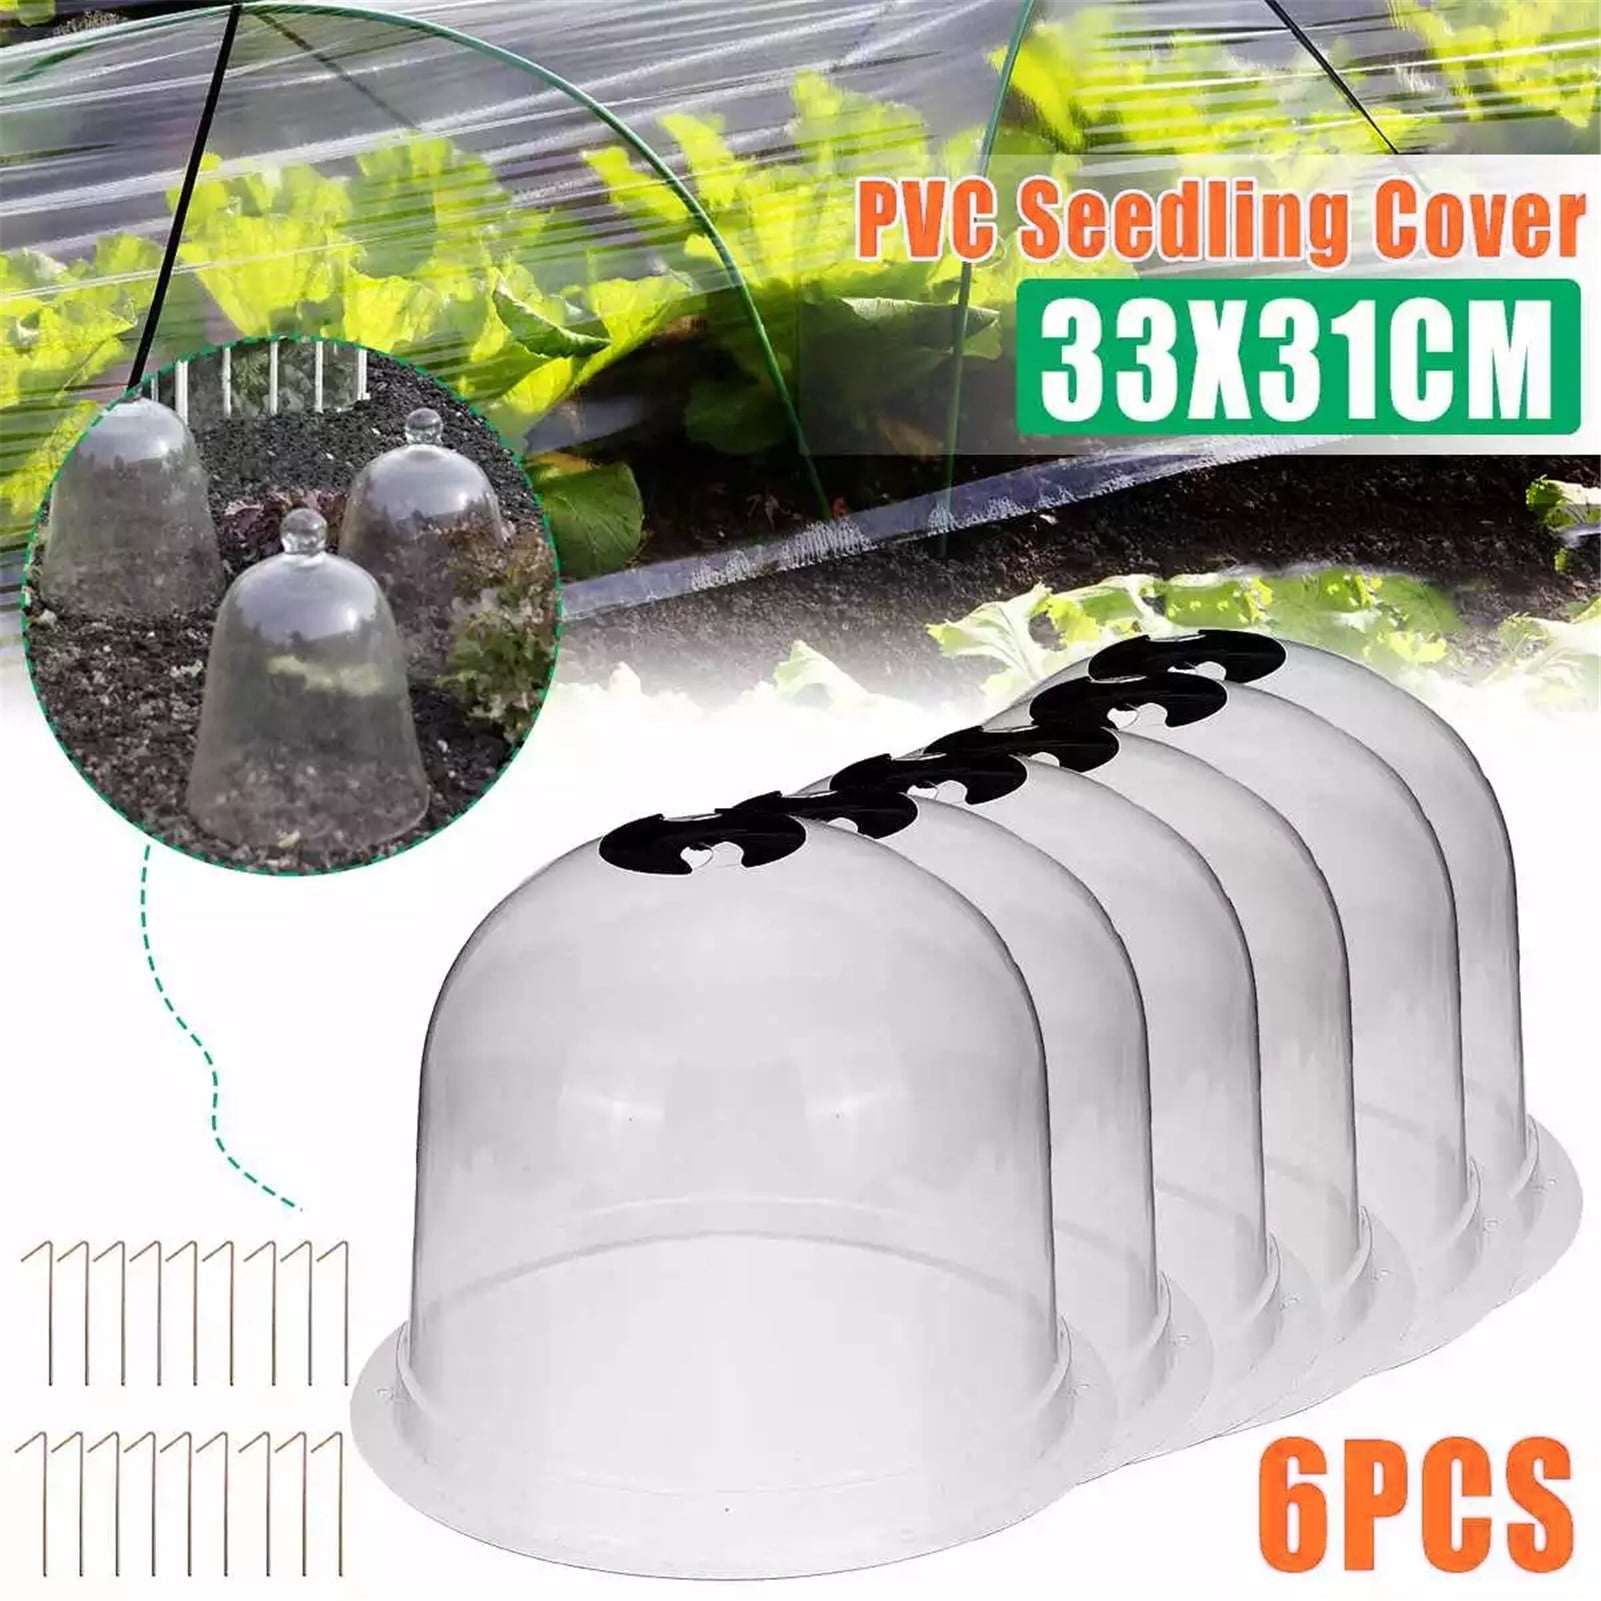 6-Pack Medium Reusable Plastic Mini Greenhouse 8 Diam Plant Covers Frost Guard Freeze Protection for Plants Outdoors Garden Cloche Dome Garden Tools Garden Accessories x6.7 H